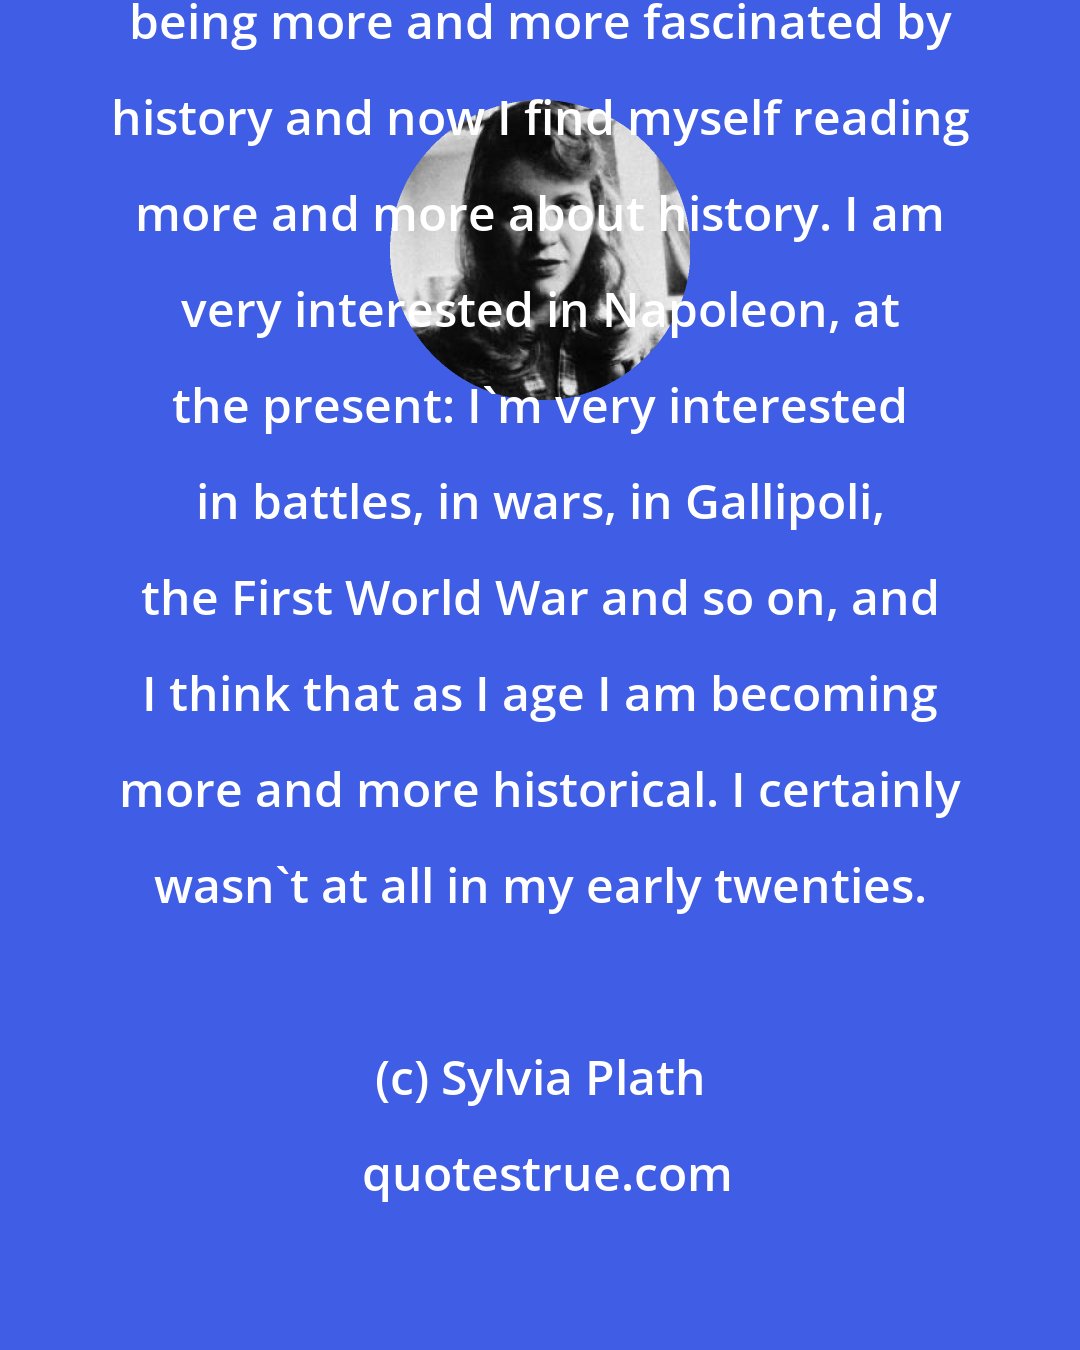 Sylvia Plath: I am not a historian, but I find myself being more and more fascinated by history and now I find myself reading more and more about history. I am very interested in Napoleon, at the present: I'm very interested in battles, in wars, in Gallipoli, the First World War and so on, and I think that as I age I am becoming more and more historical. I certainly wasn't at all in my early twenties.